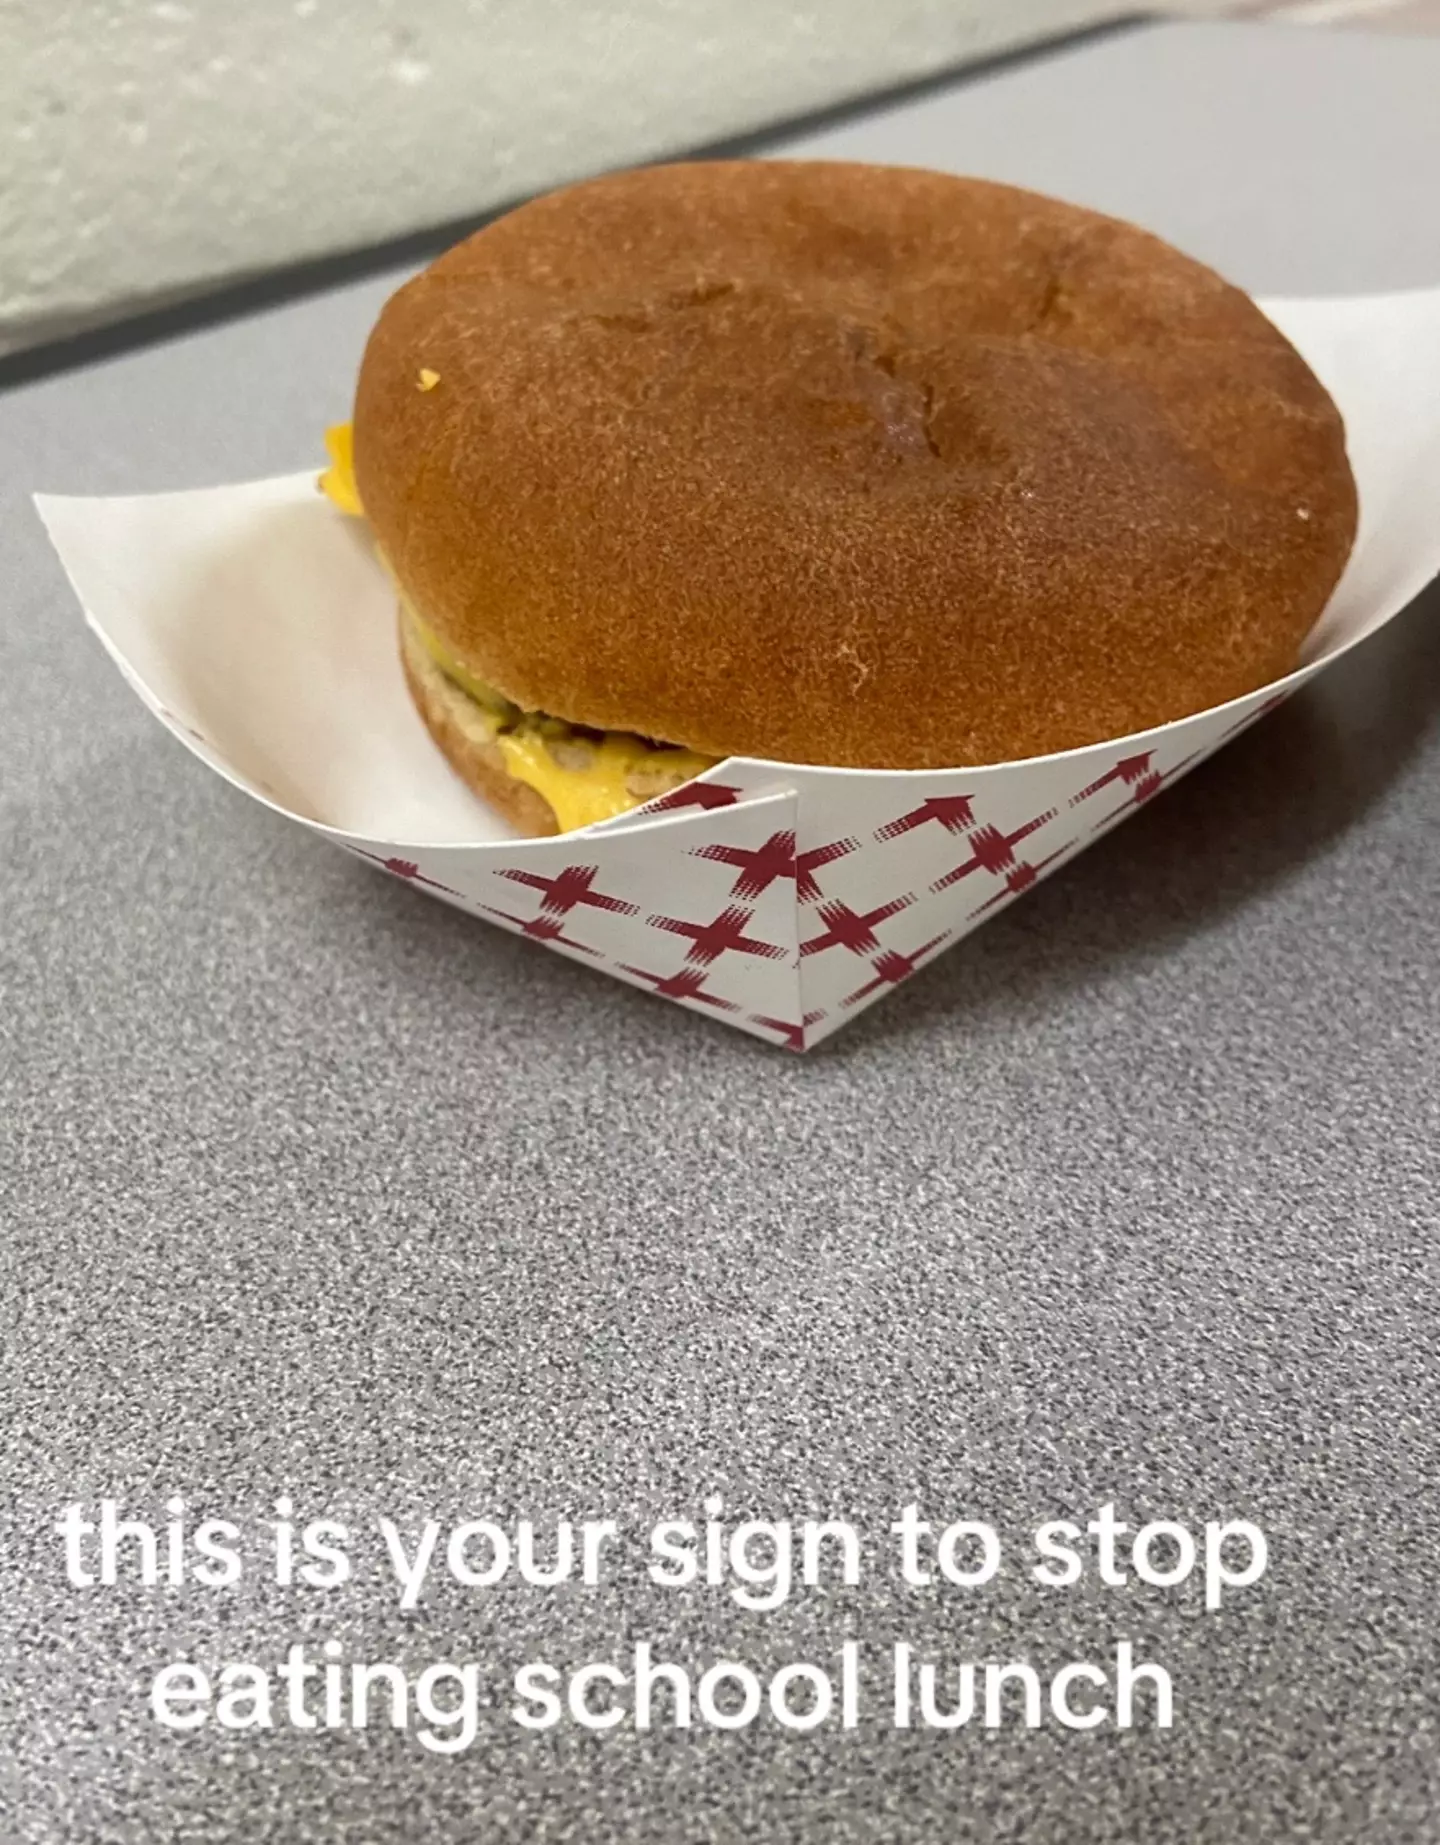 The TikToker resolved the burger is 'your sign to stop eating school lunch'.